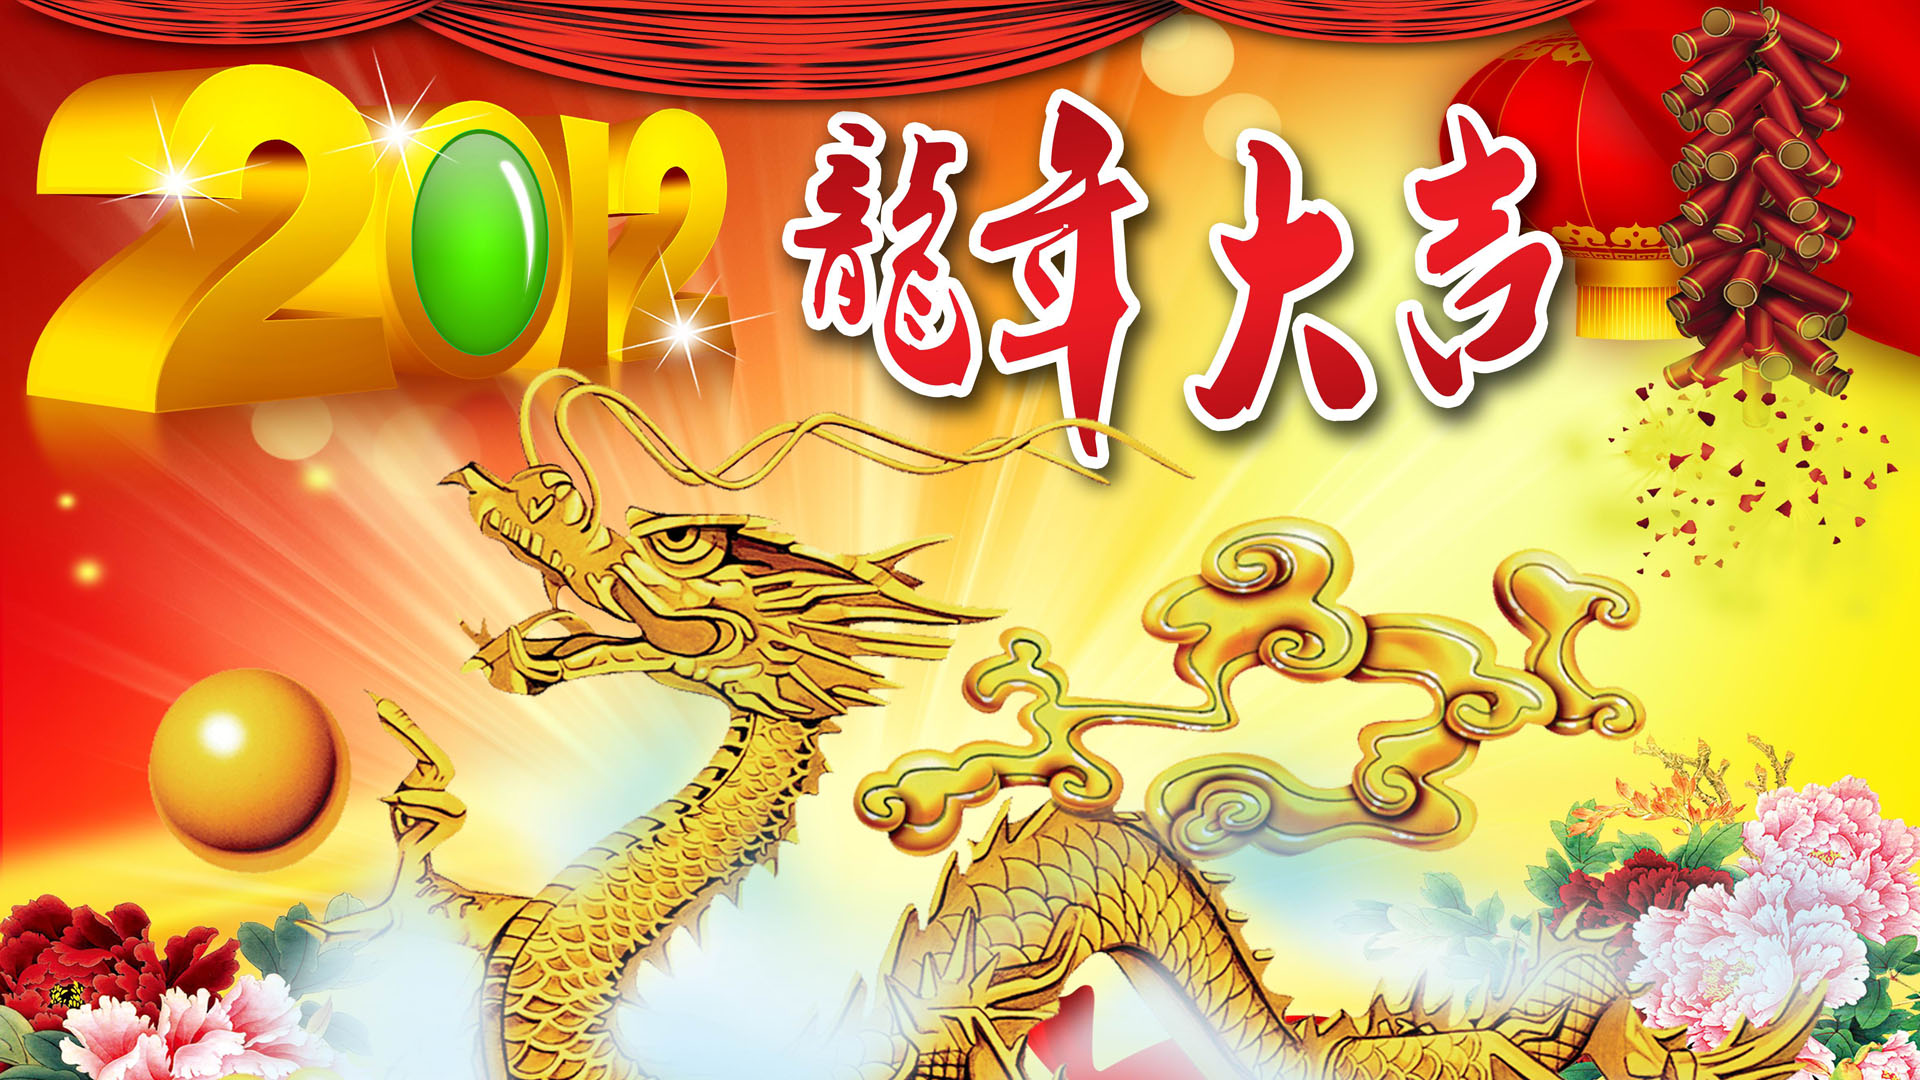 2012 Year of the Dragon Happy New Year Blessings Wallpaper